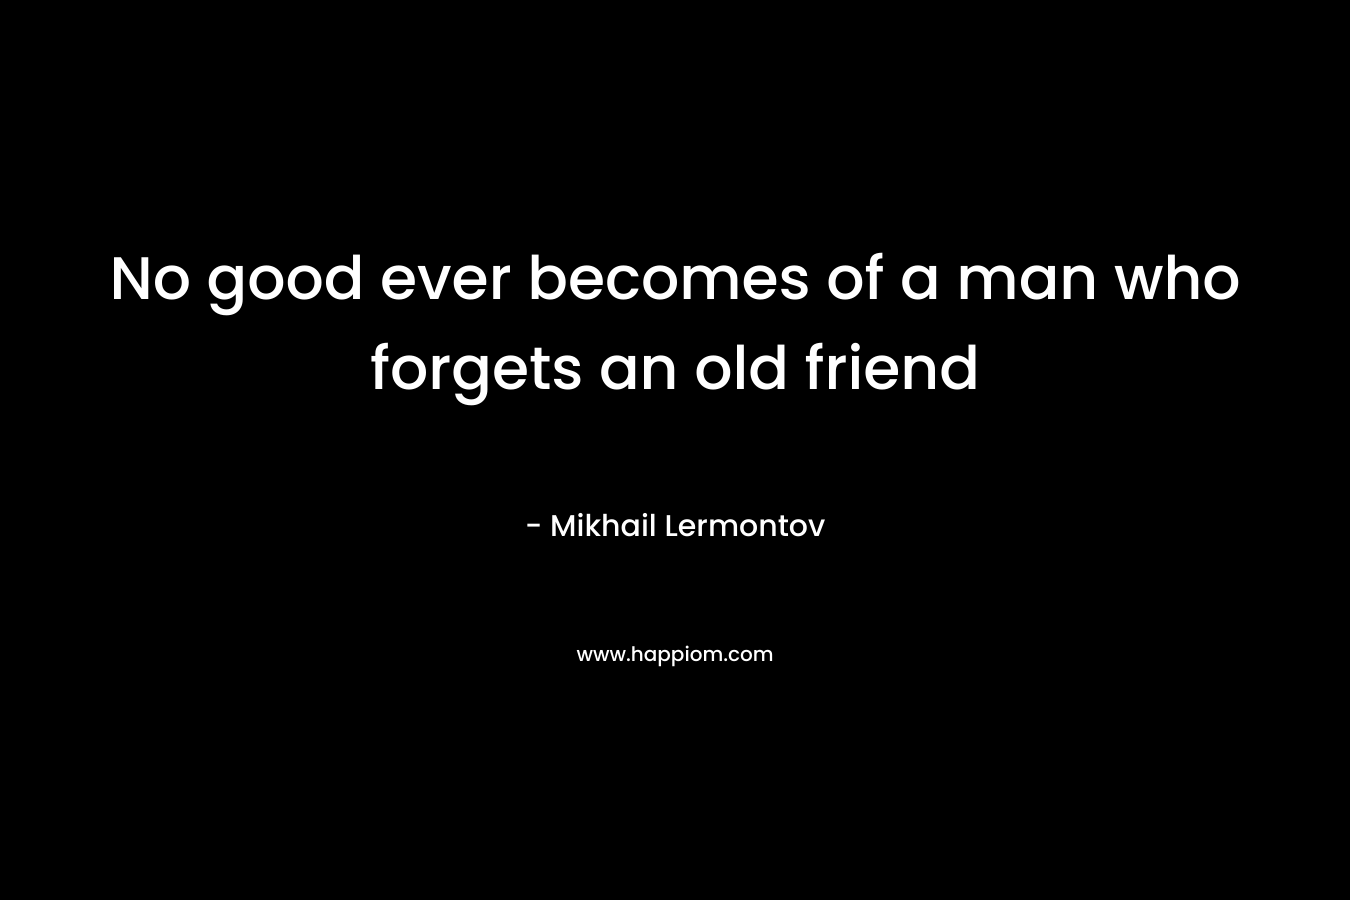 No good ever becomes of a man who forgets an old friend